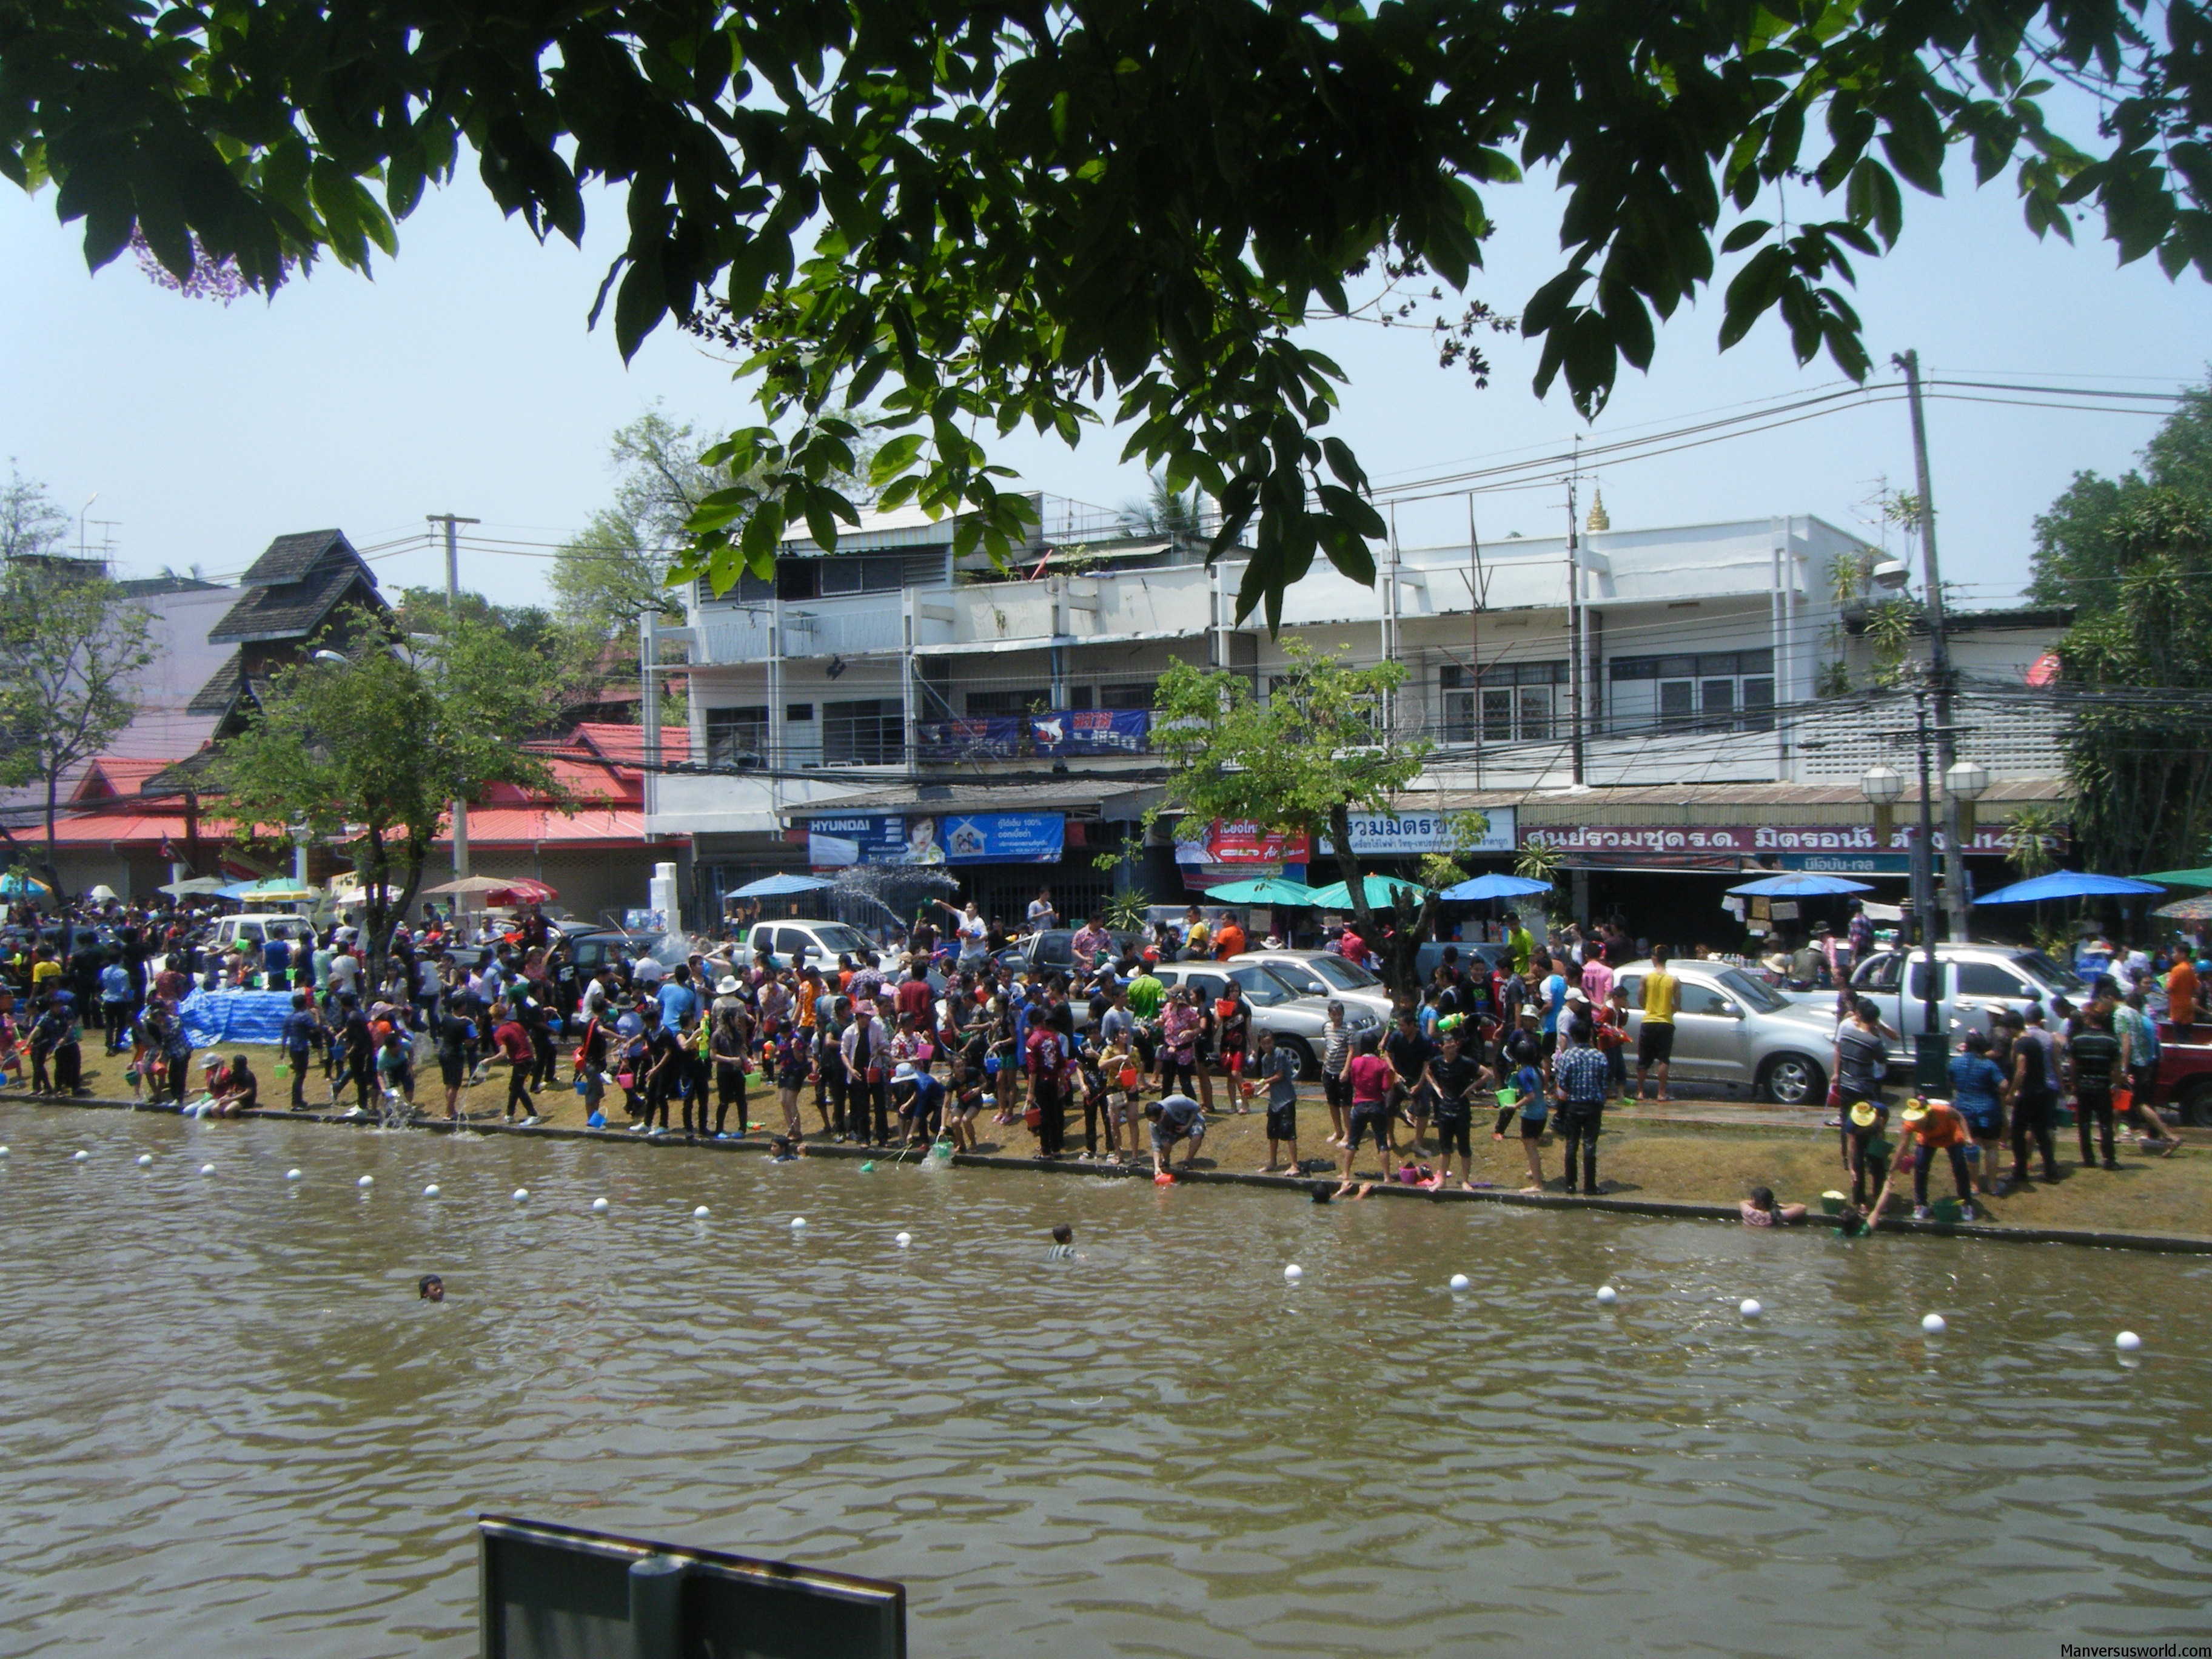 Crowds gather by the water in Chiang Mai for Songkran